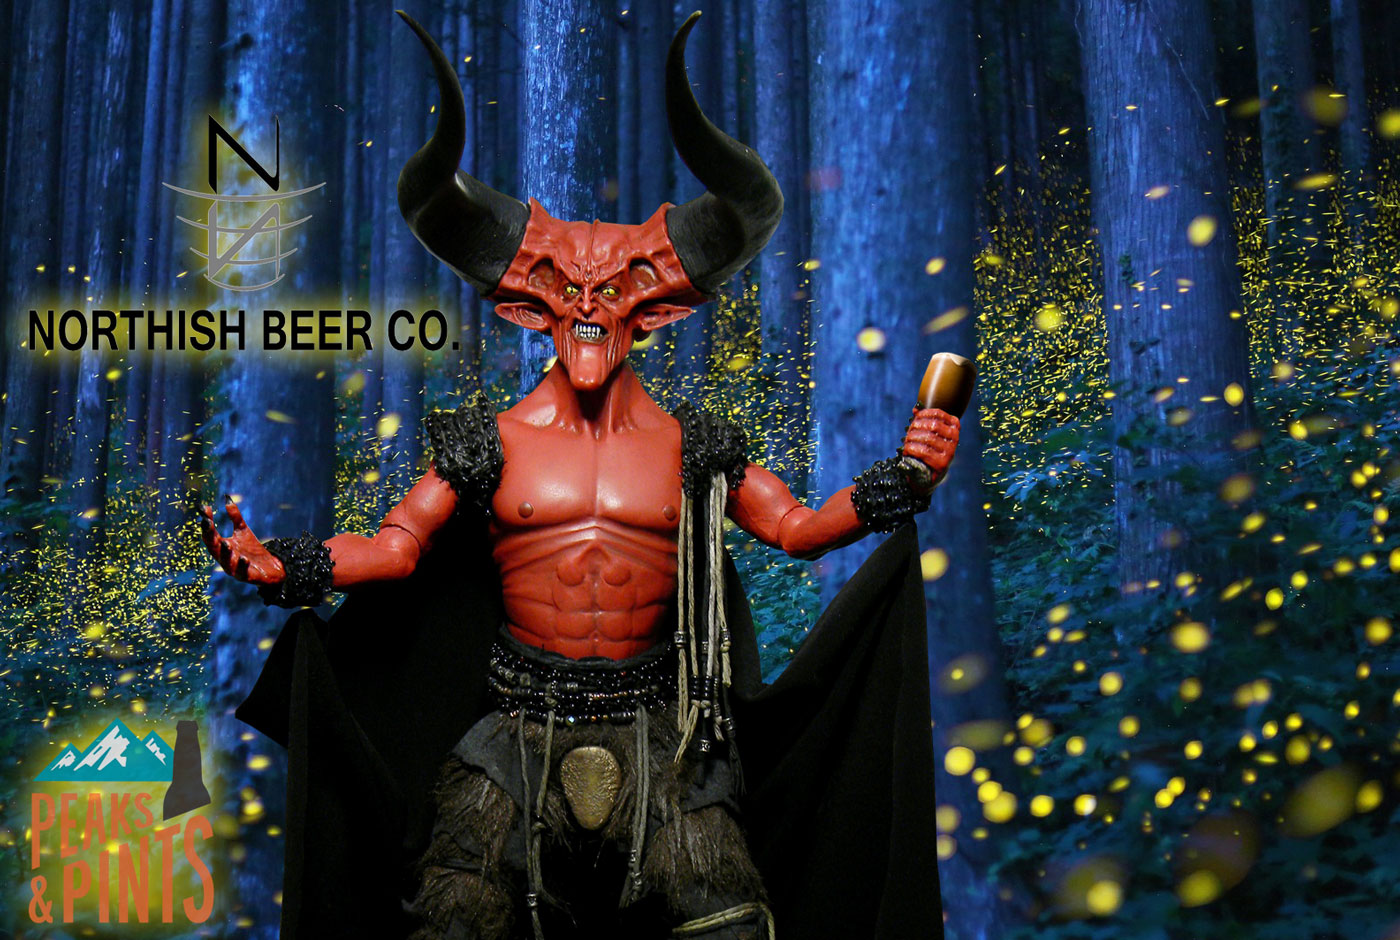 Starring Northish Beer Feat. Tim Curry as The Darkness Peaks and